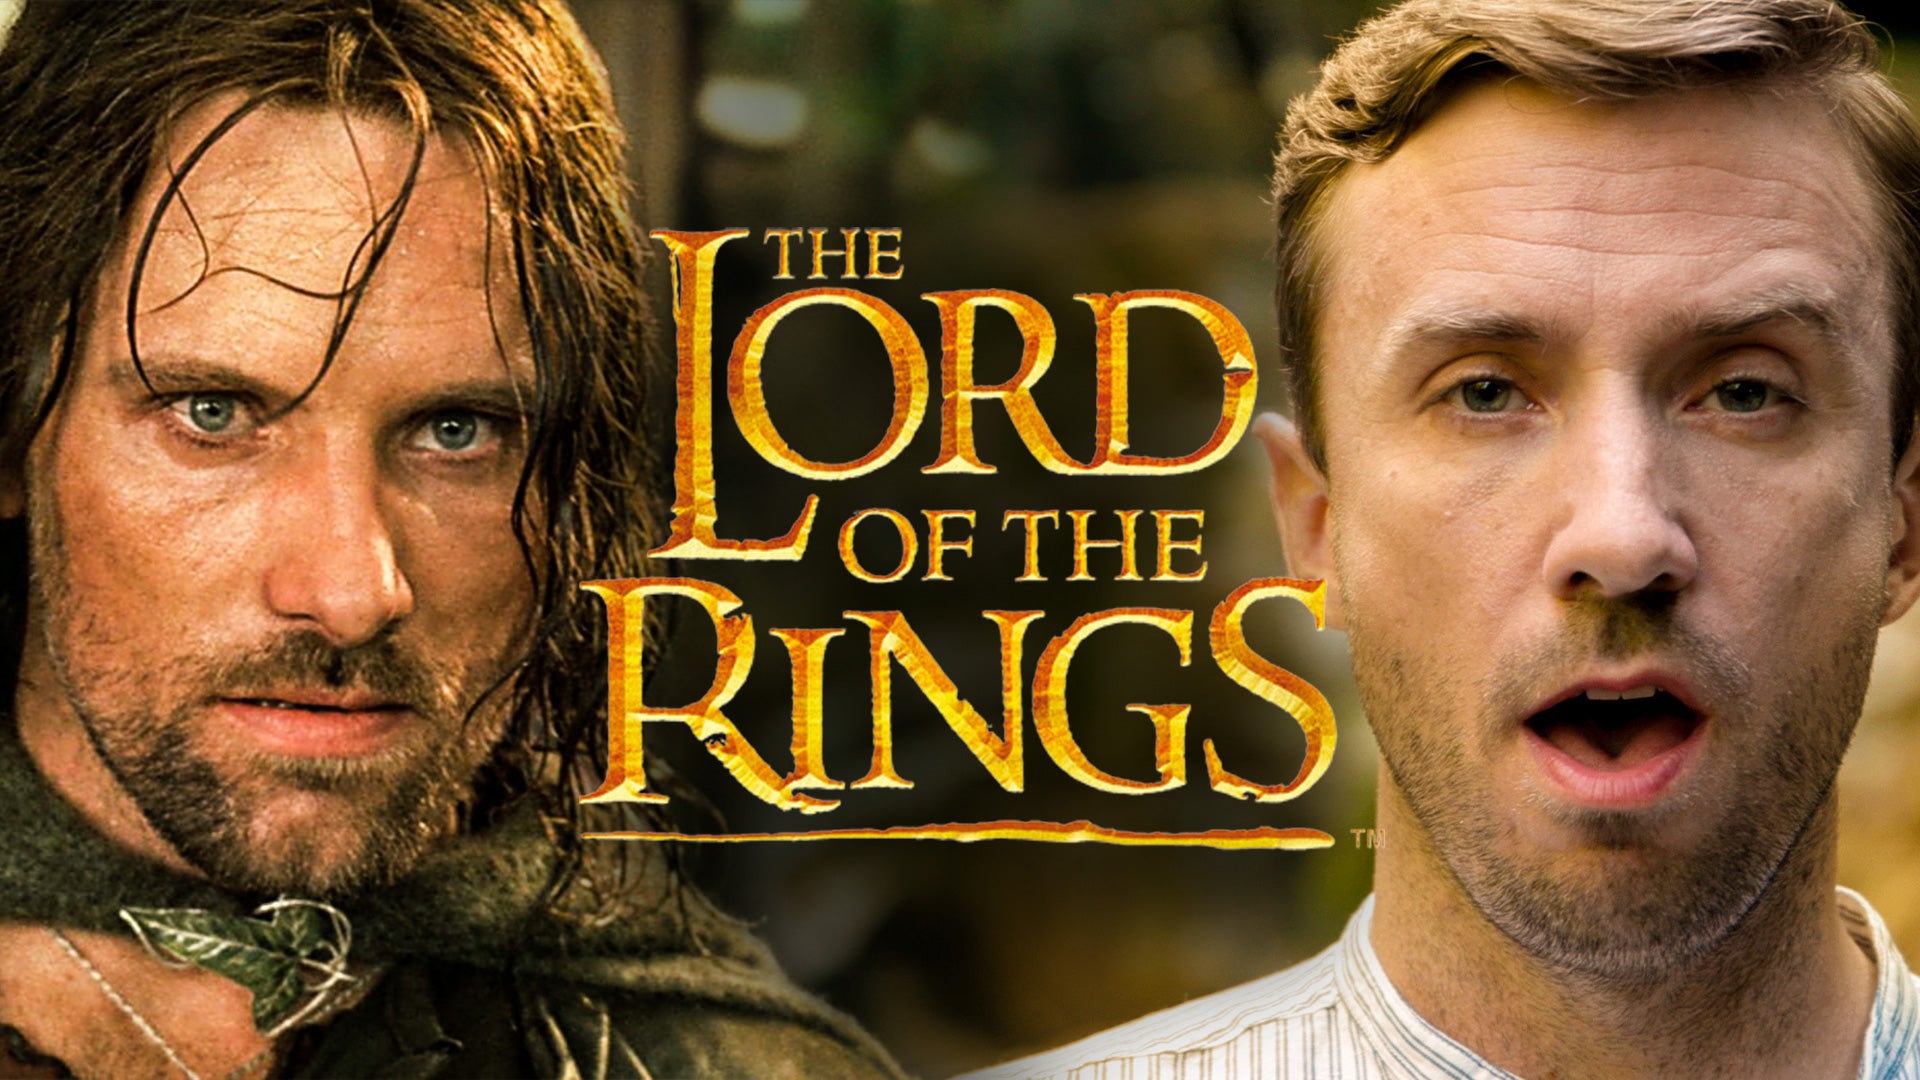 The Complete Peter Hollens - Lord Of The Rings Playlist